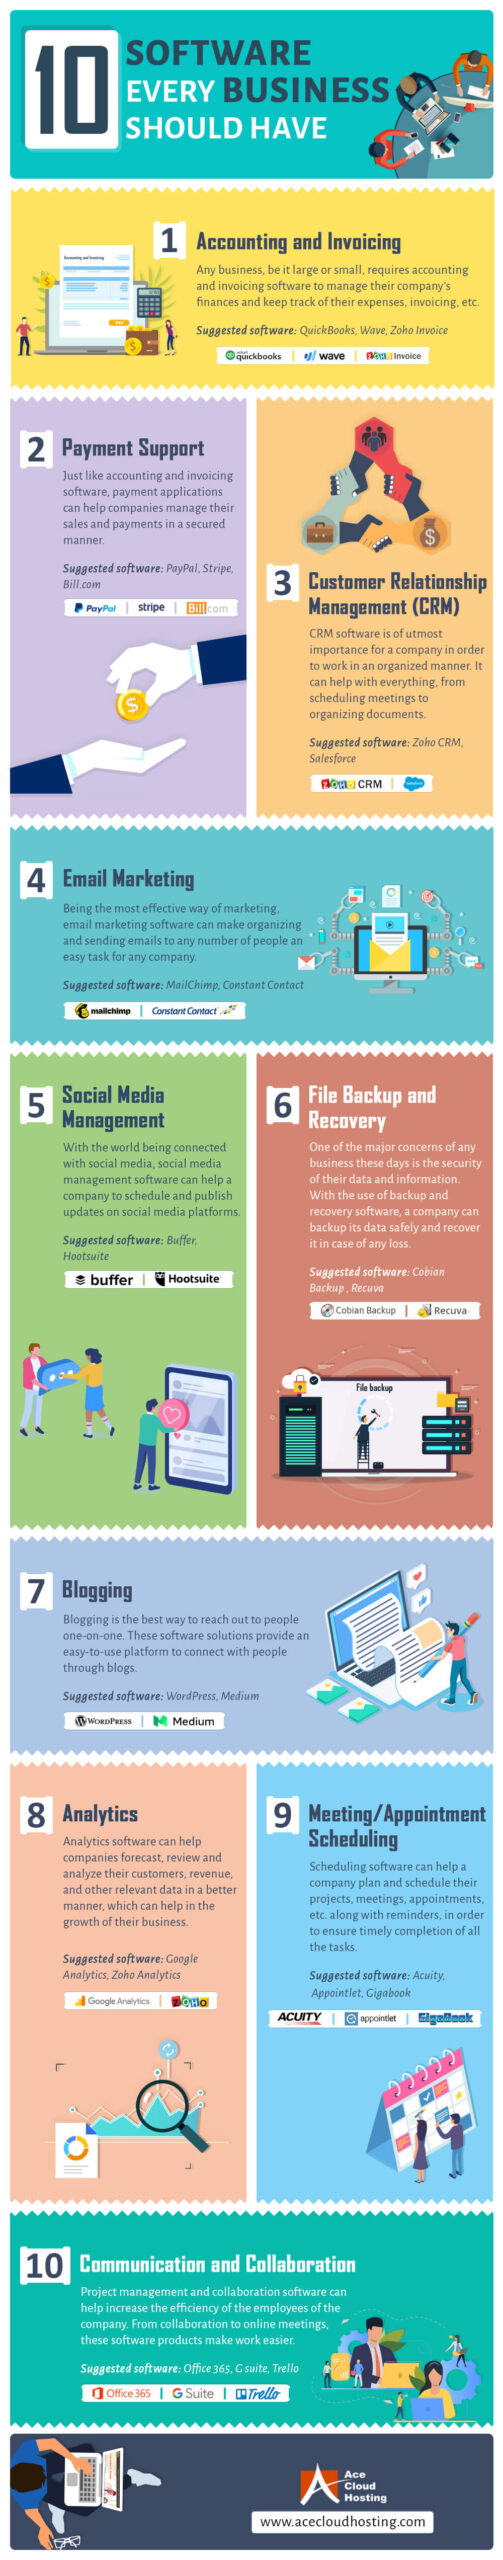 Infographic: 10 Essential Things QA Teams Need To Remember About Testing | LogiGear Magazine